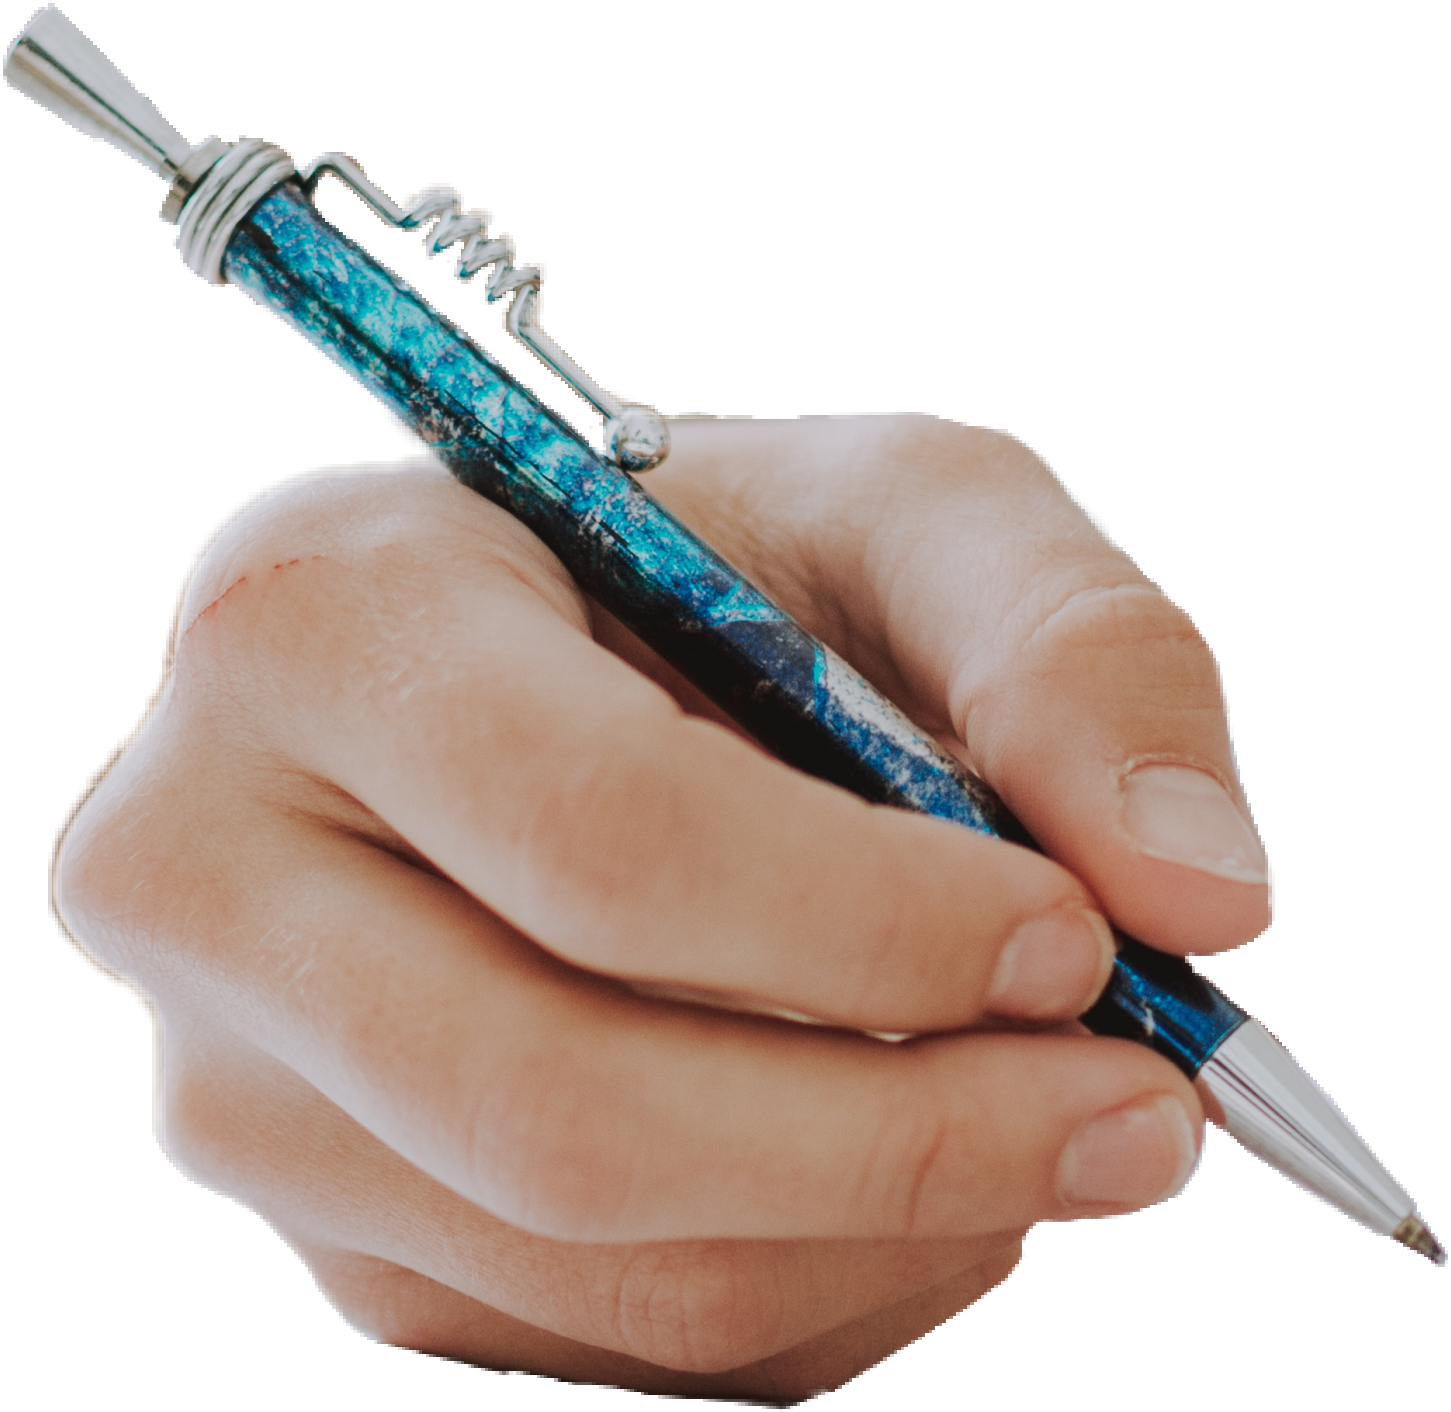 Pen pencil. Pen and Pencil. Hand with Pen. Writers HD image. Time with Pen PNG.